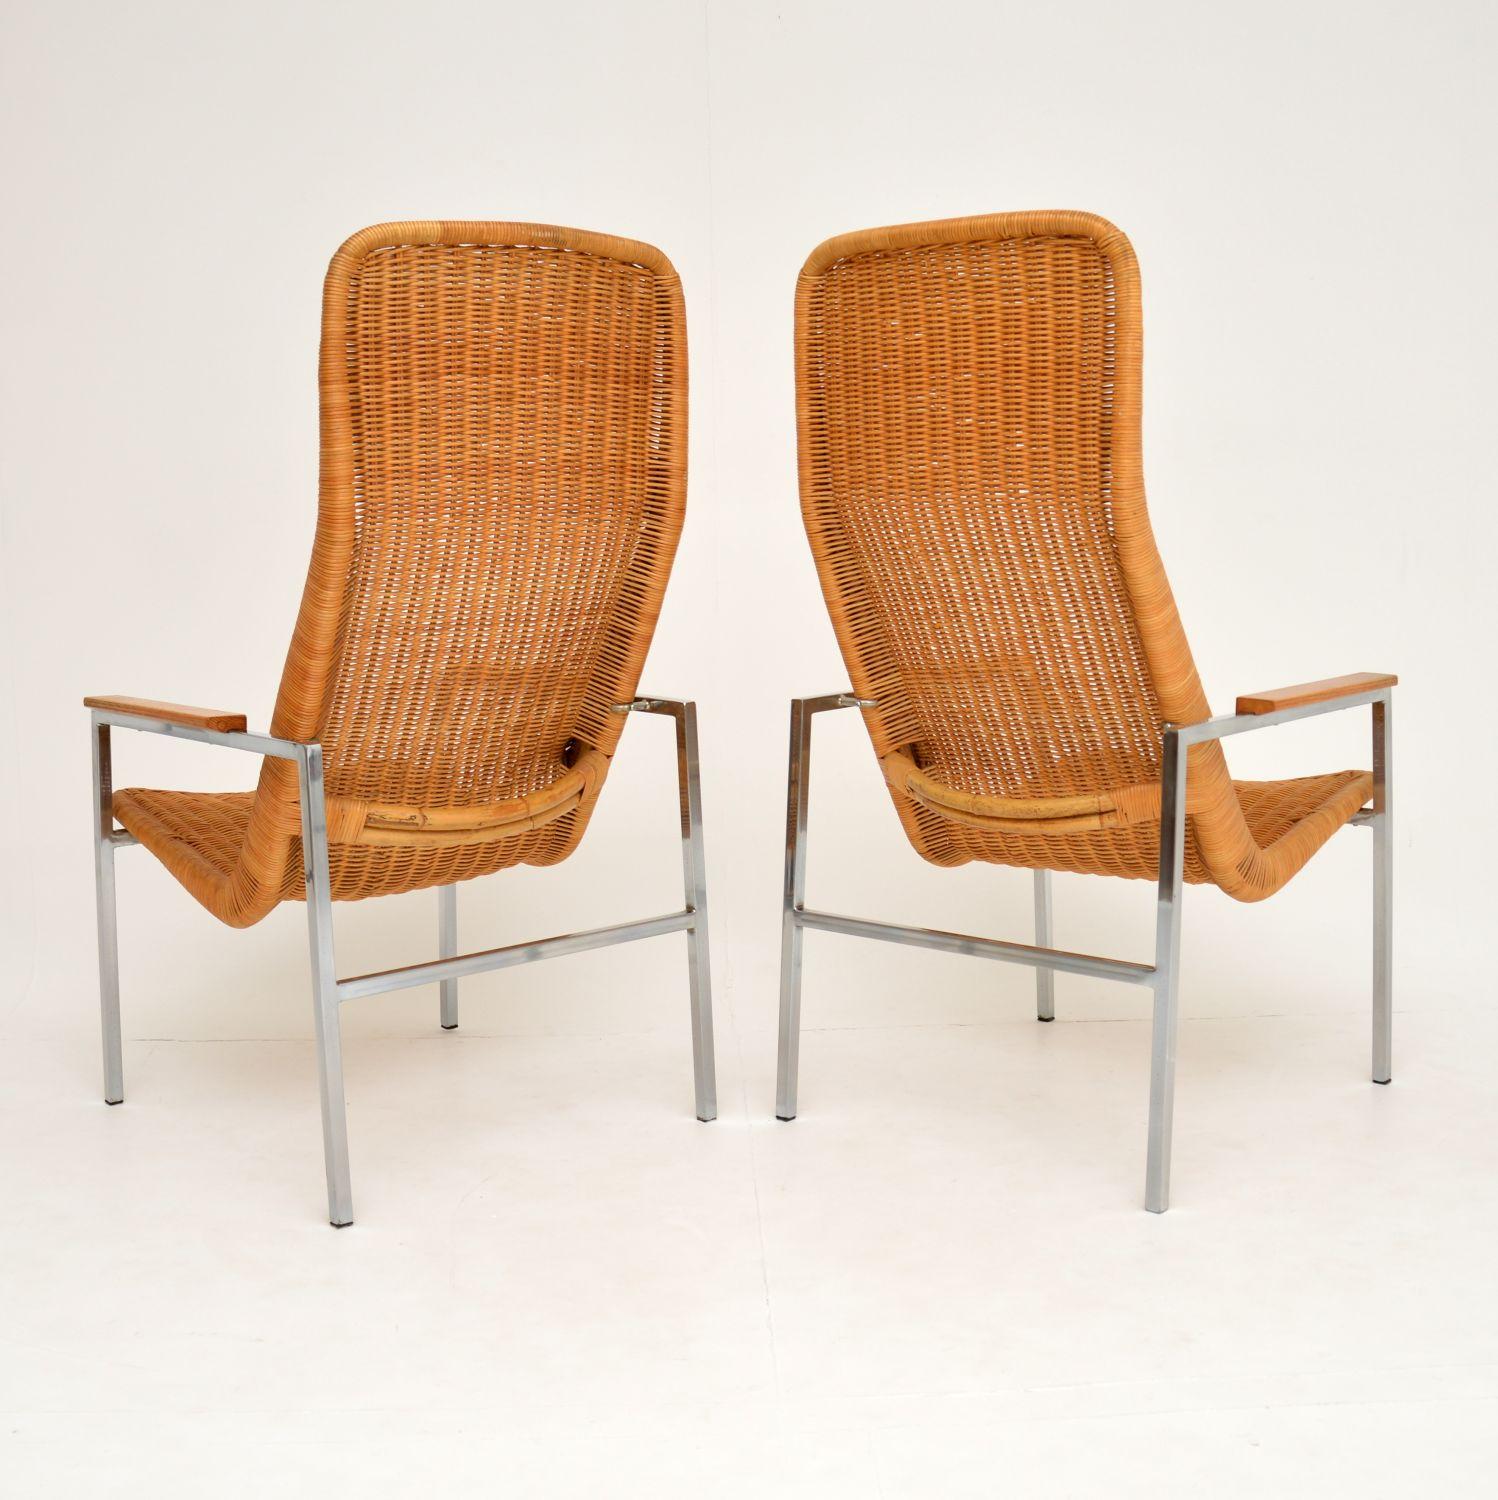 20th Century Pair of Vintage Chrome and Rattan Armchairs by Dirk Van Sliedrecht